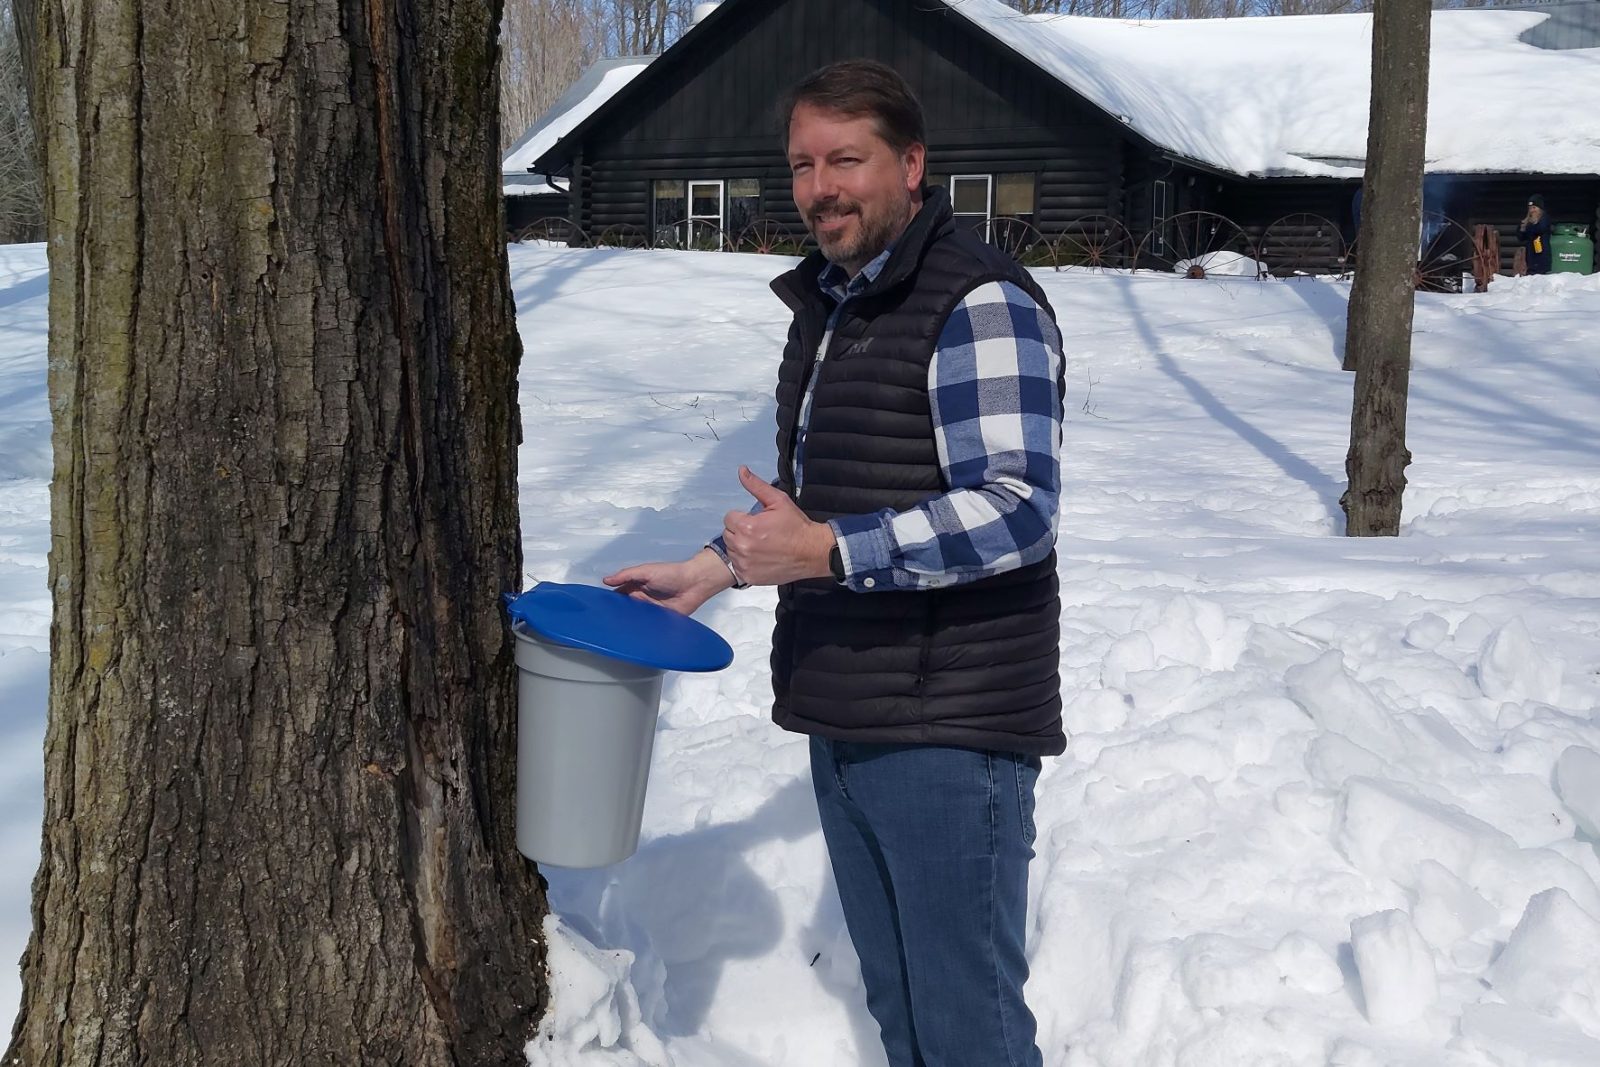 Celebrating the first tapping of maple syrup season